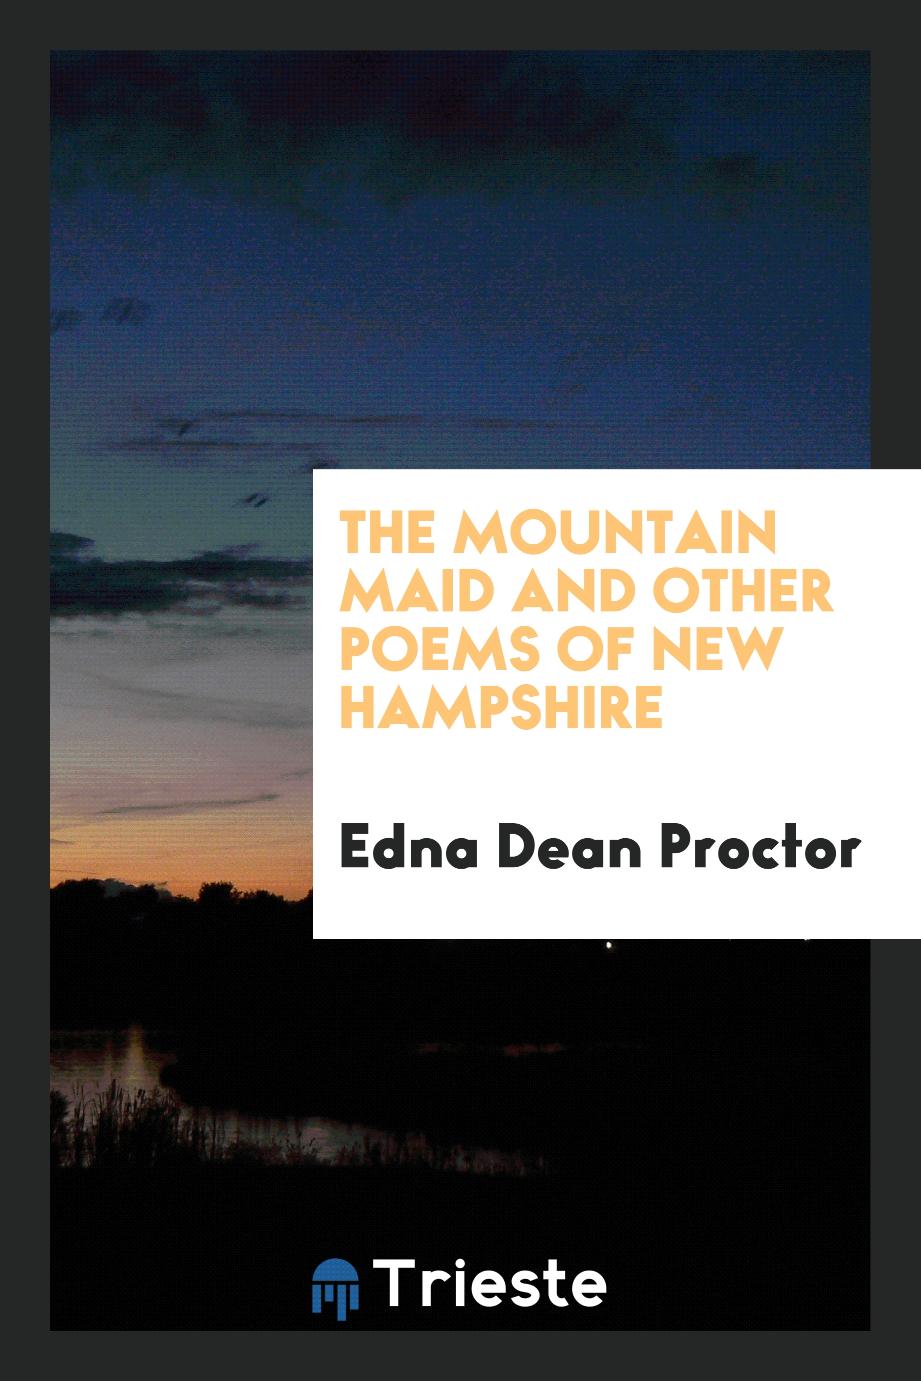 The Mountain Maid and Other Poems of New Hampshire